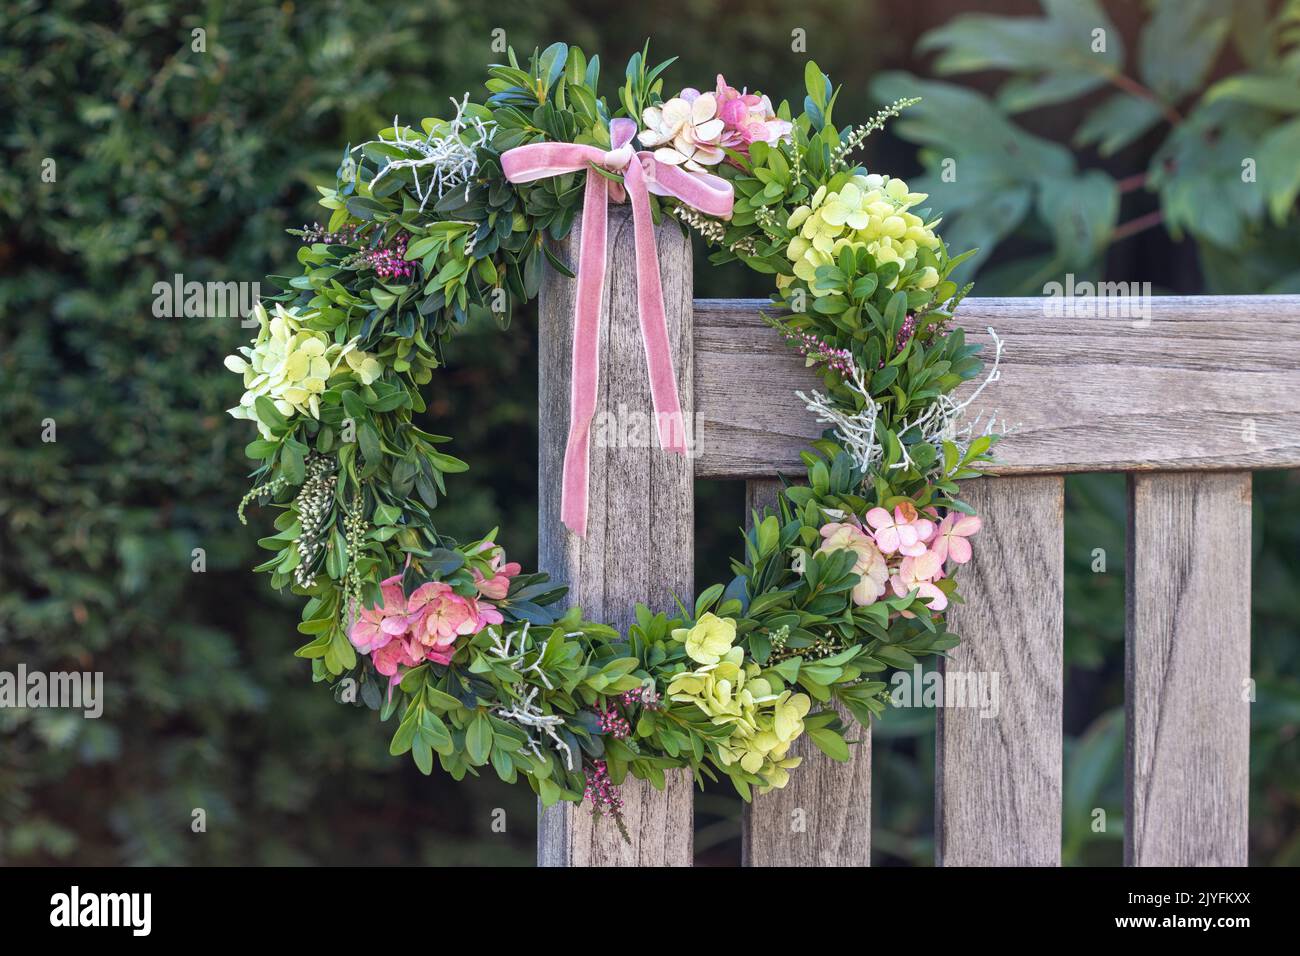 wreath of hydrangea flowers and box tree branches as floral decoration Stock Photo